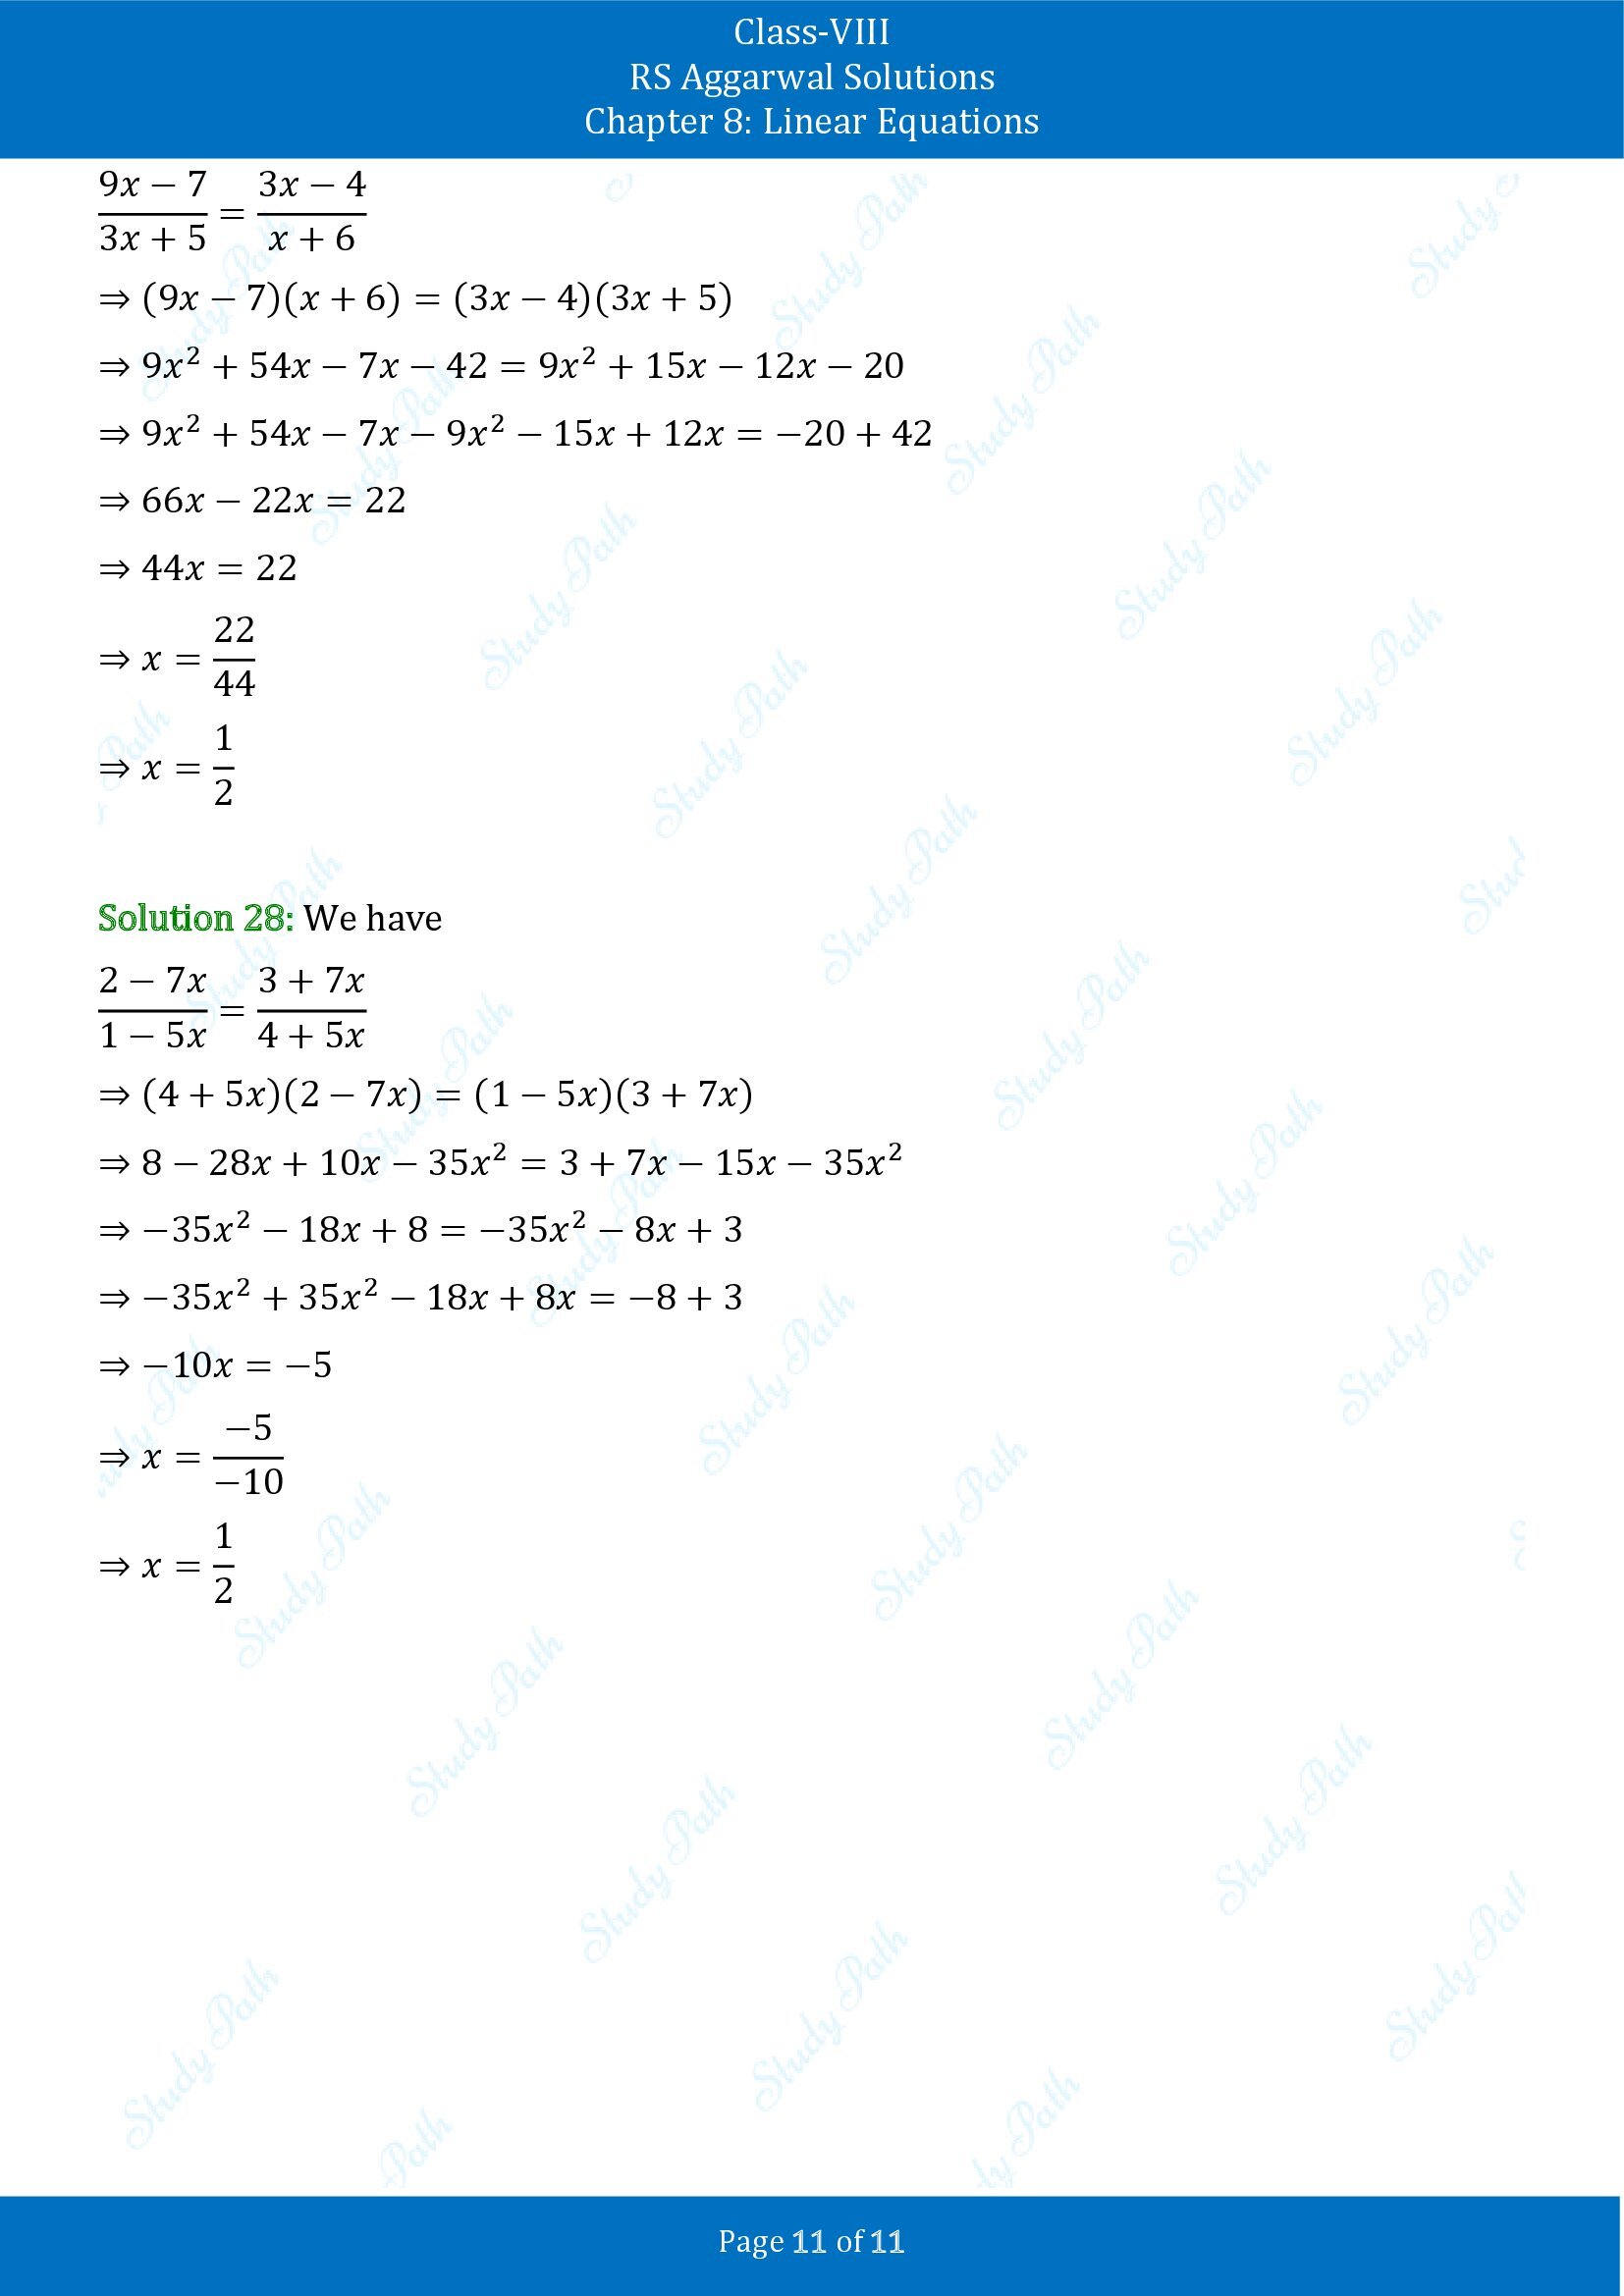 RS Aggarwal Solutions Class 8 Chapter 8 Linear Equations Exercise 8A 00011